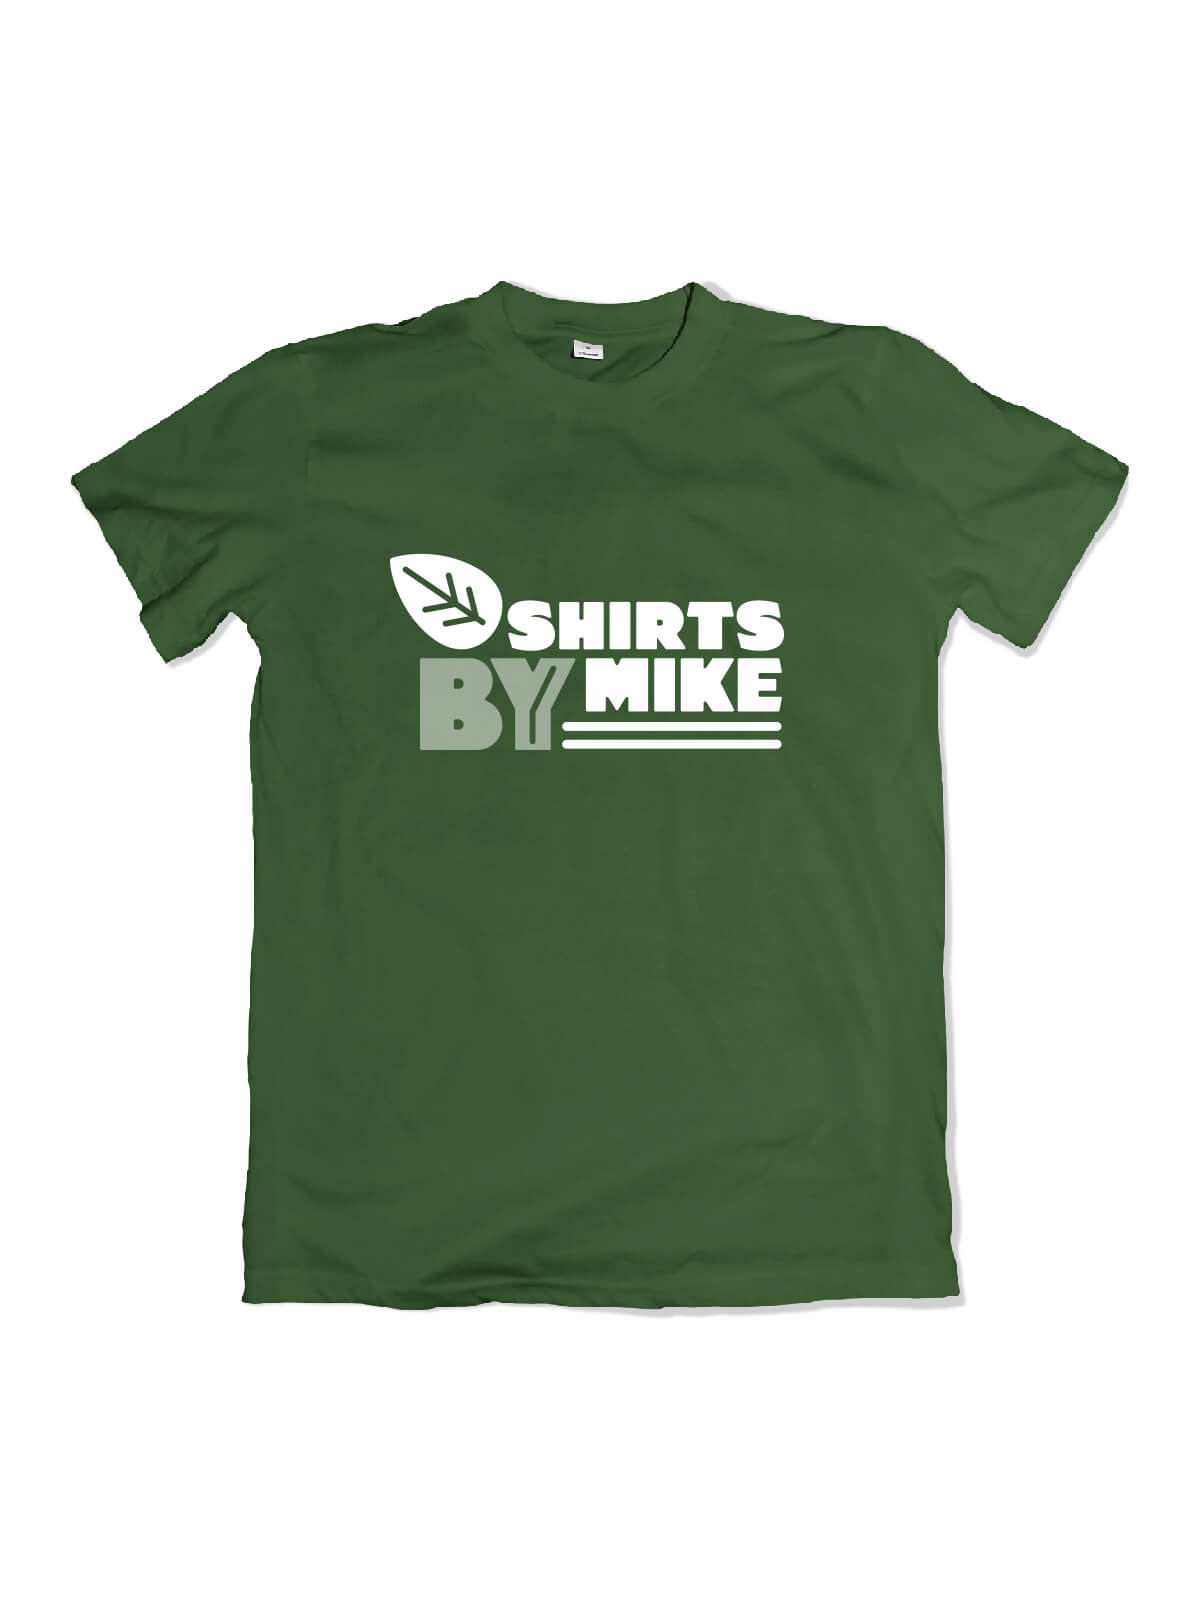 green t-shirt with Shirts By Mike logo